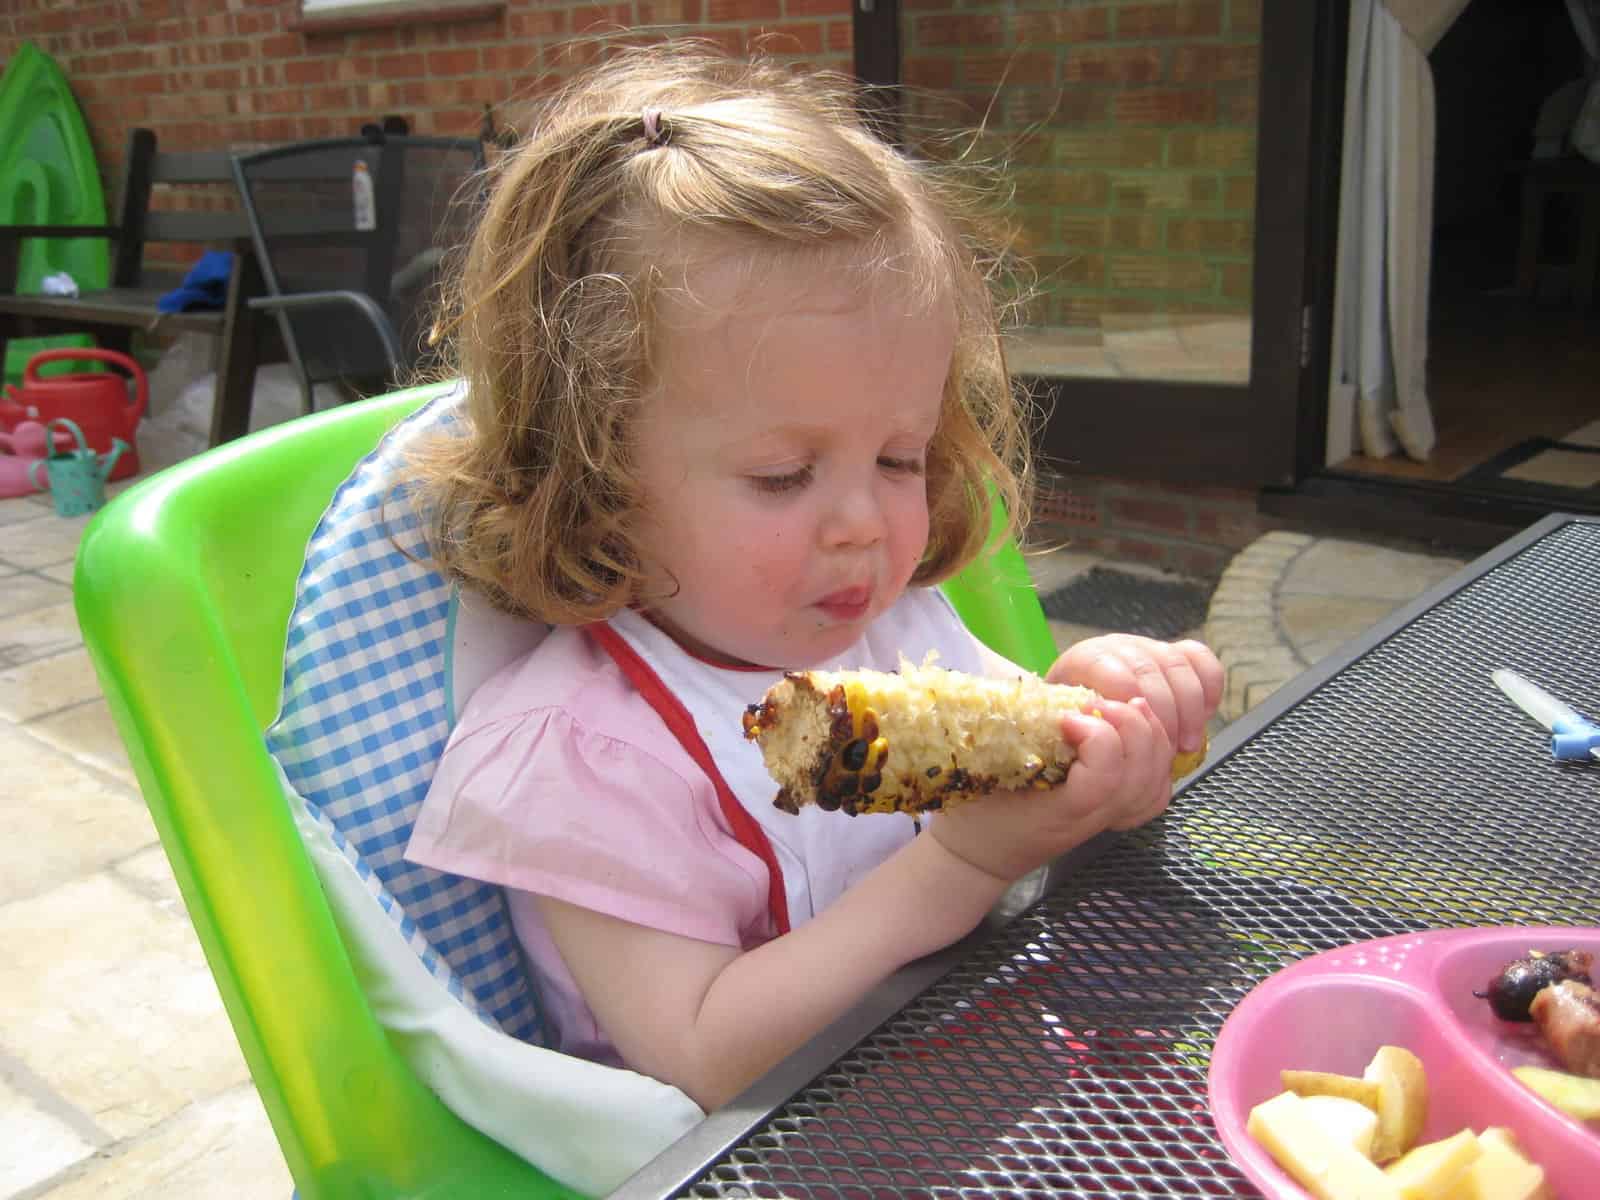 Can a Baby or Toddler Overeat? Everything You Need to Know